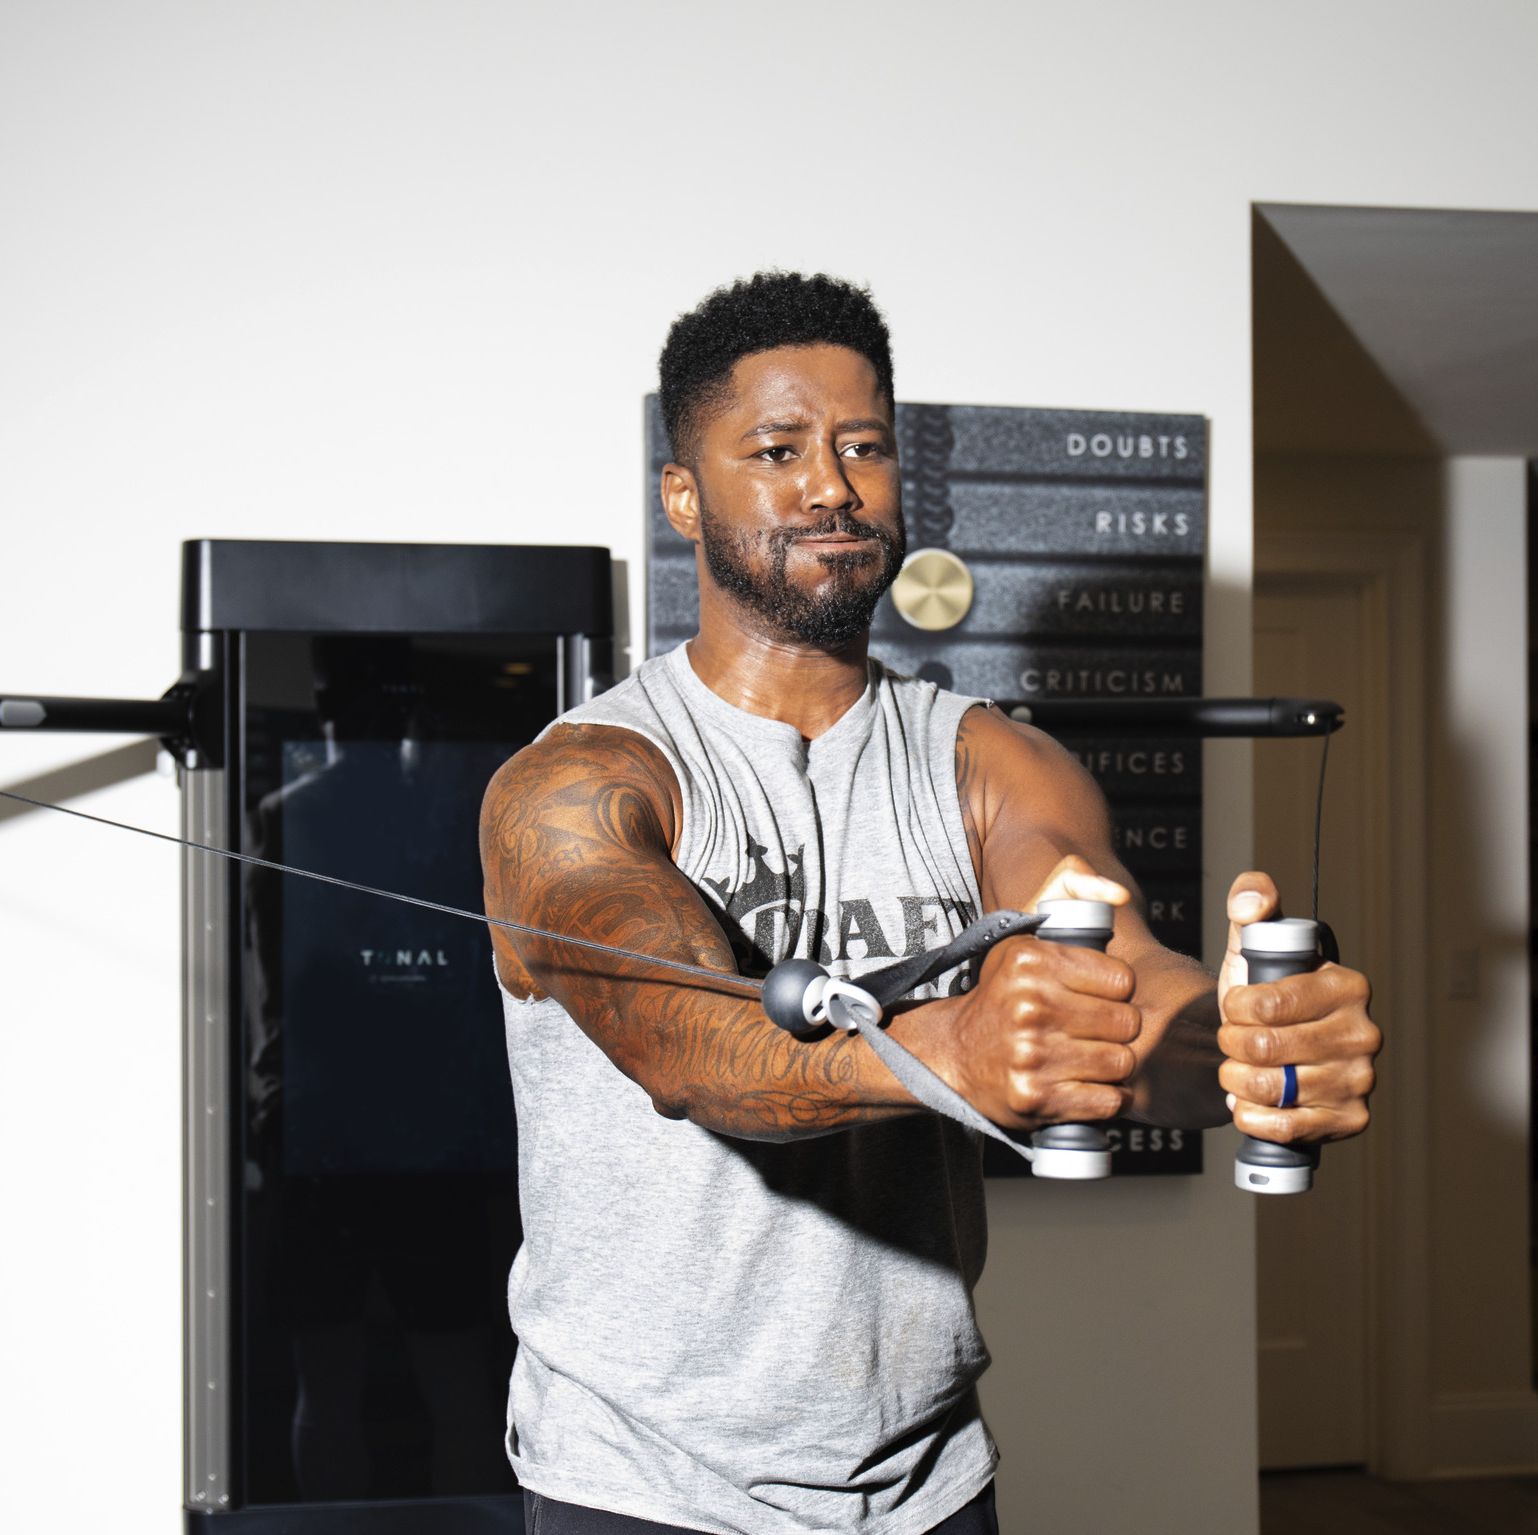 Nate Burleson 'Dates Himself' to Keep His Workouts Consistent